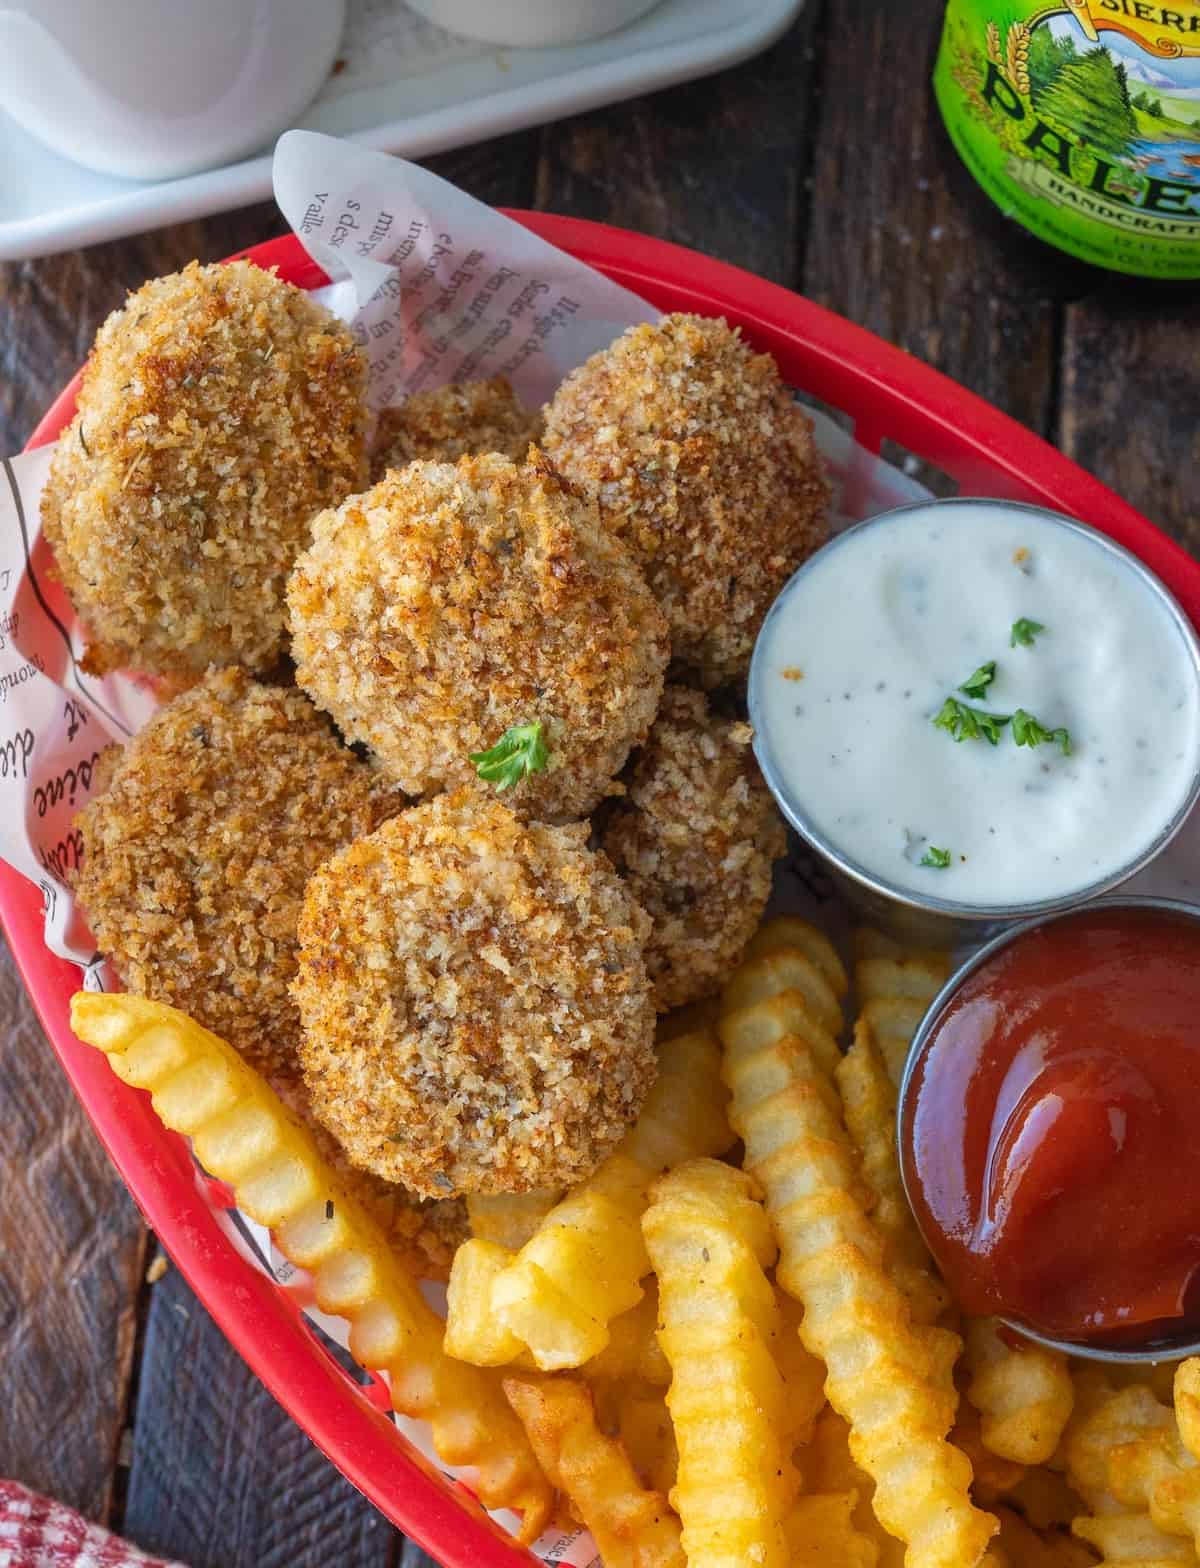 A basket of spicy chicken nuggets with crinkle cut french fries and dipping sauces.